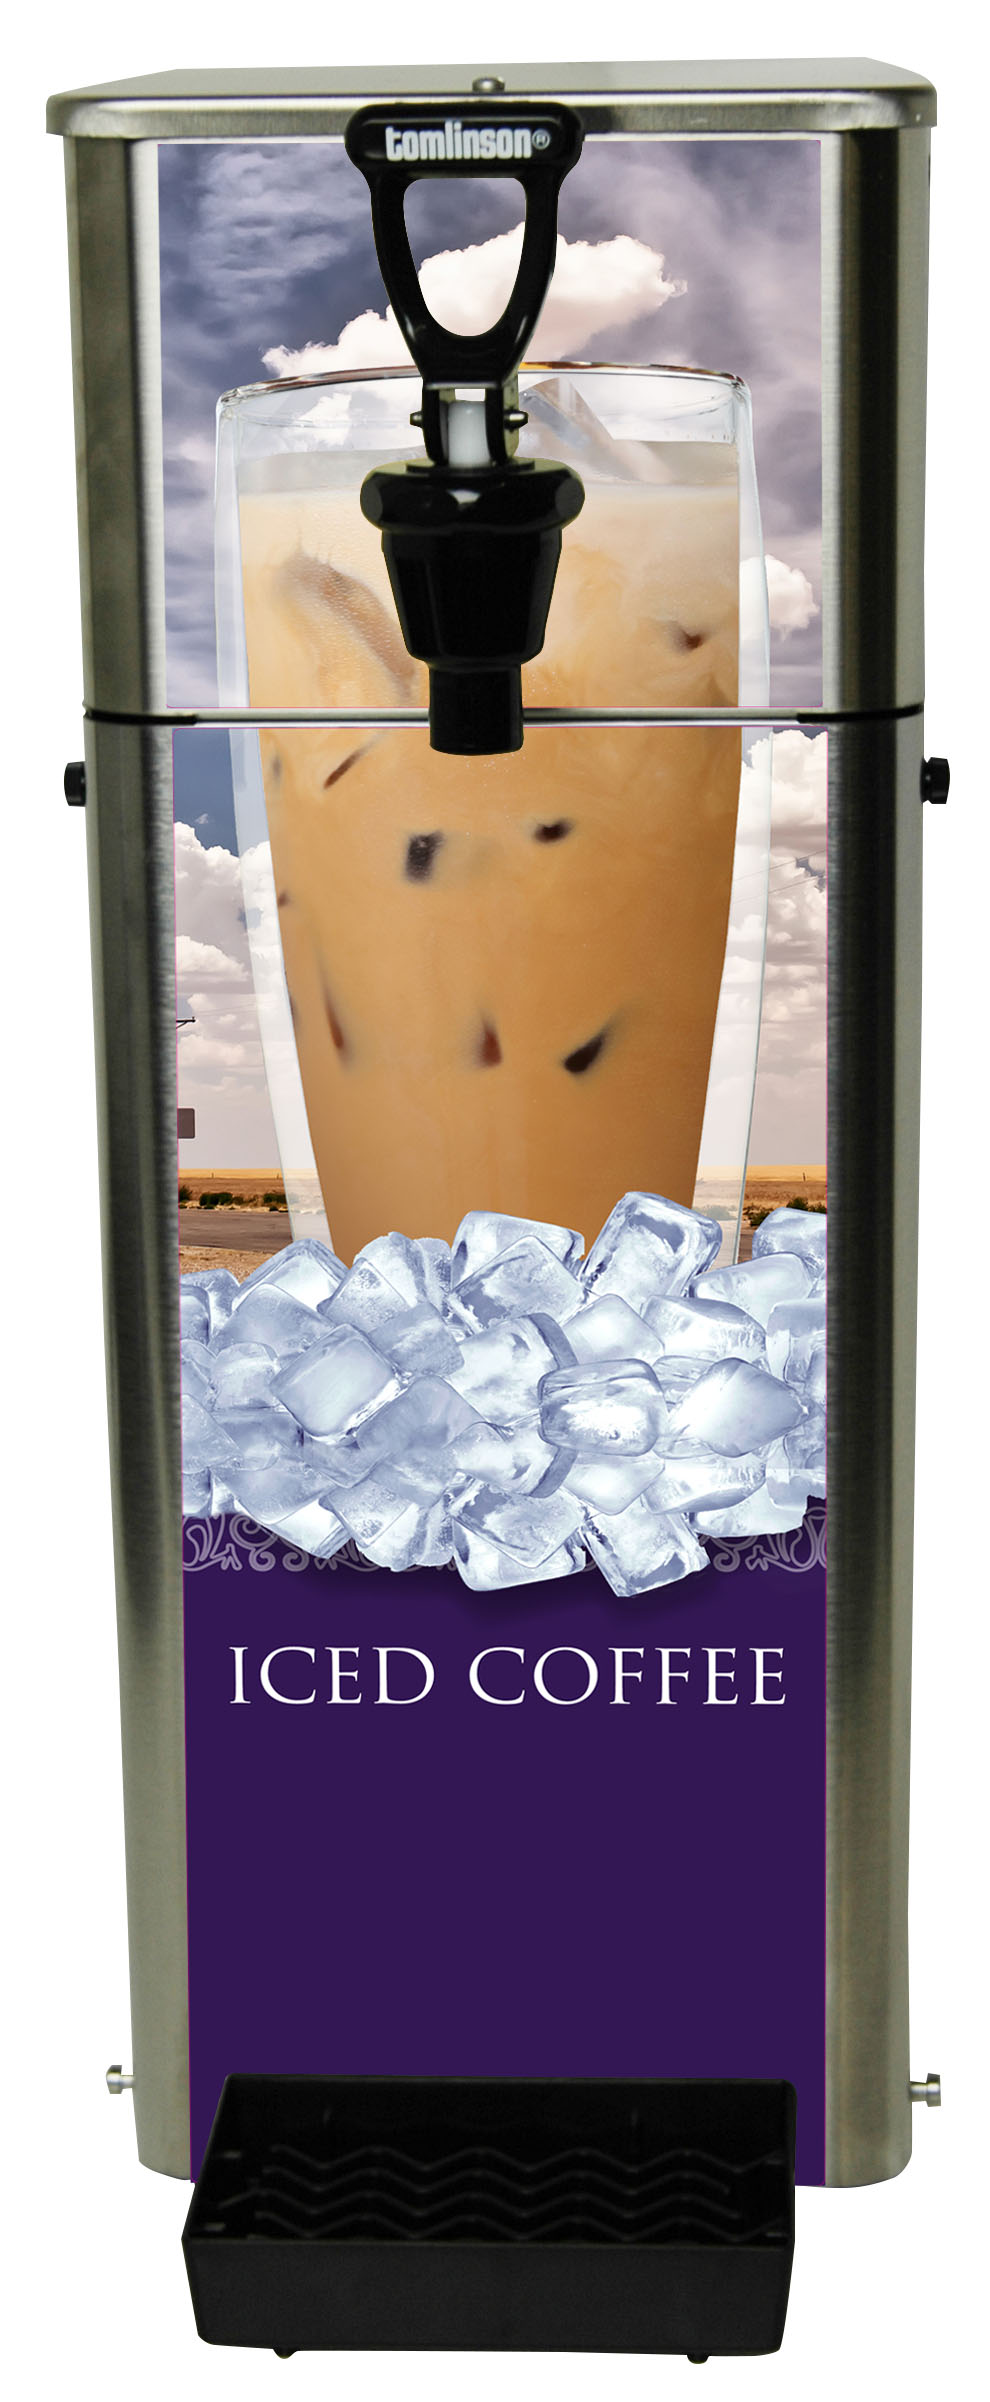 https://www.newcocoffee.com/wp-content/uploads/2018/05/front-load-iced-Coffee-1-faucet.jpg